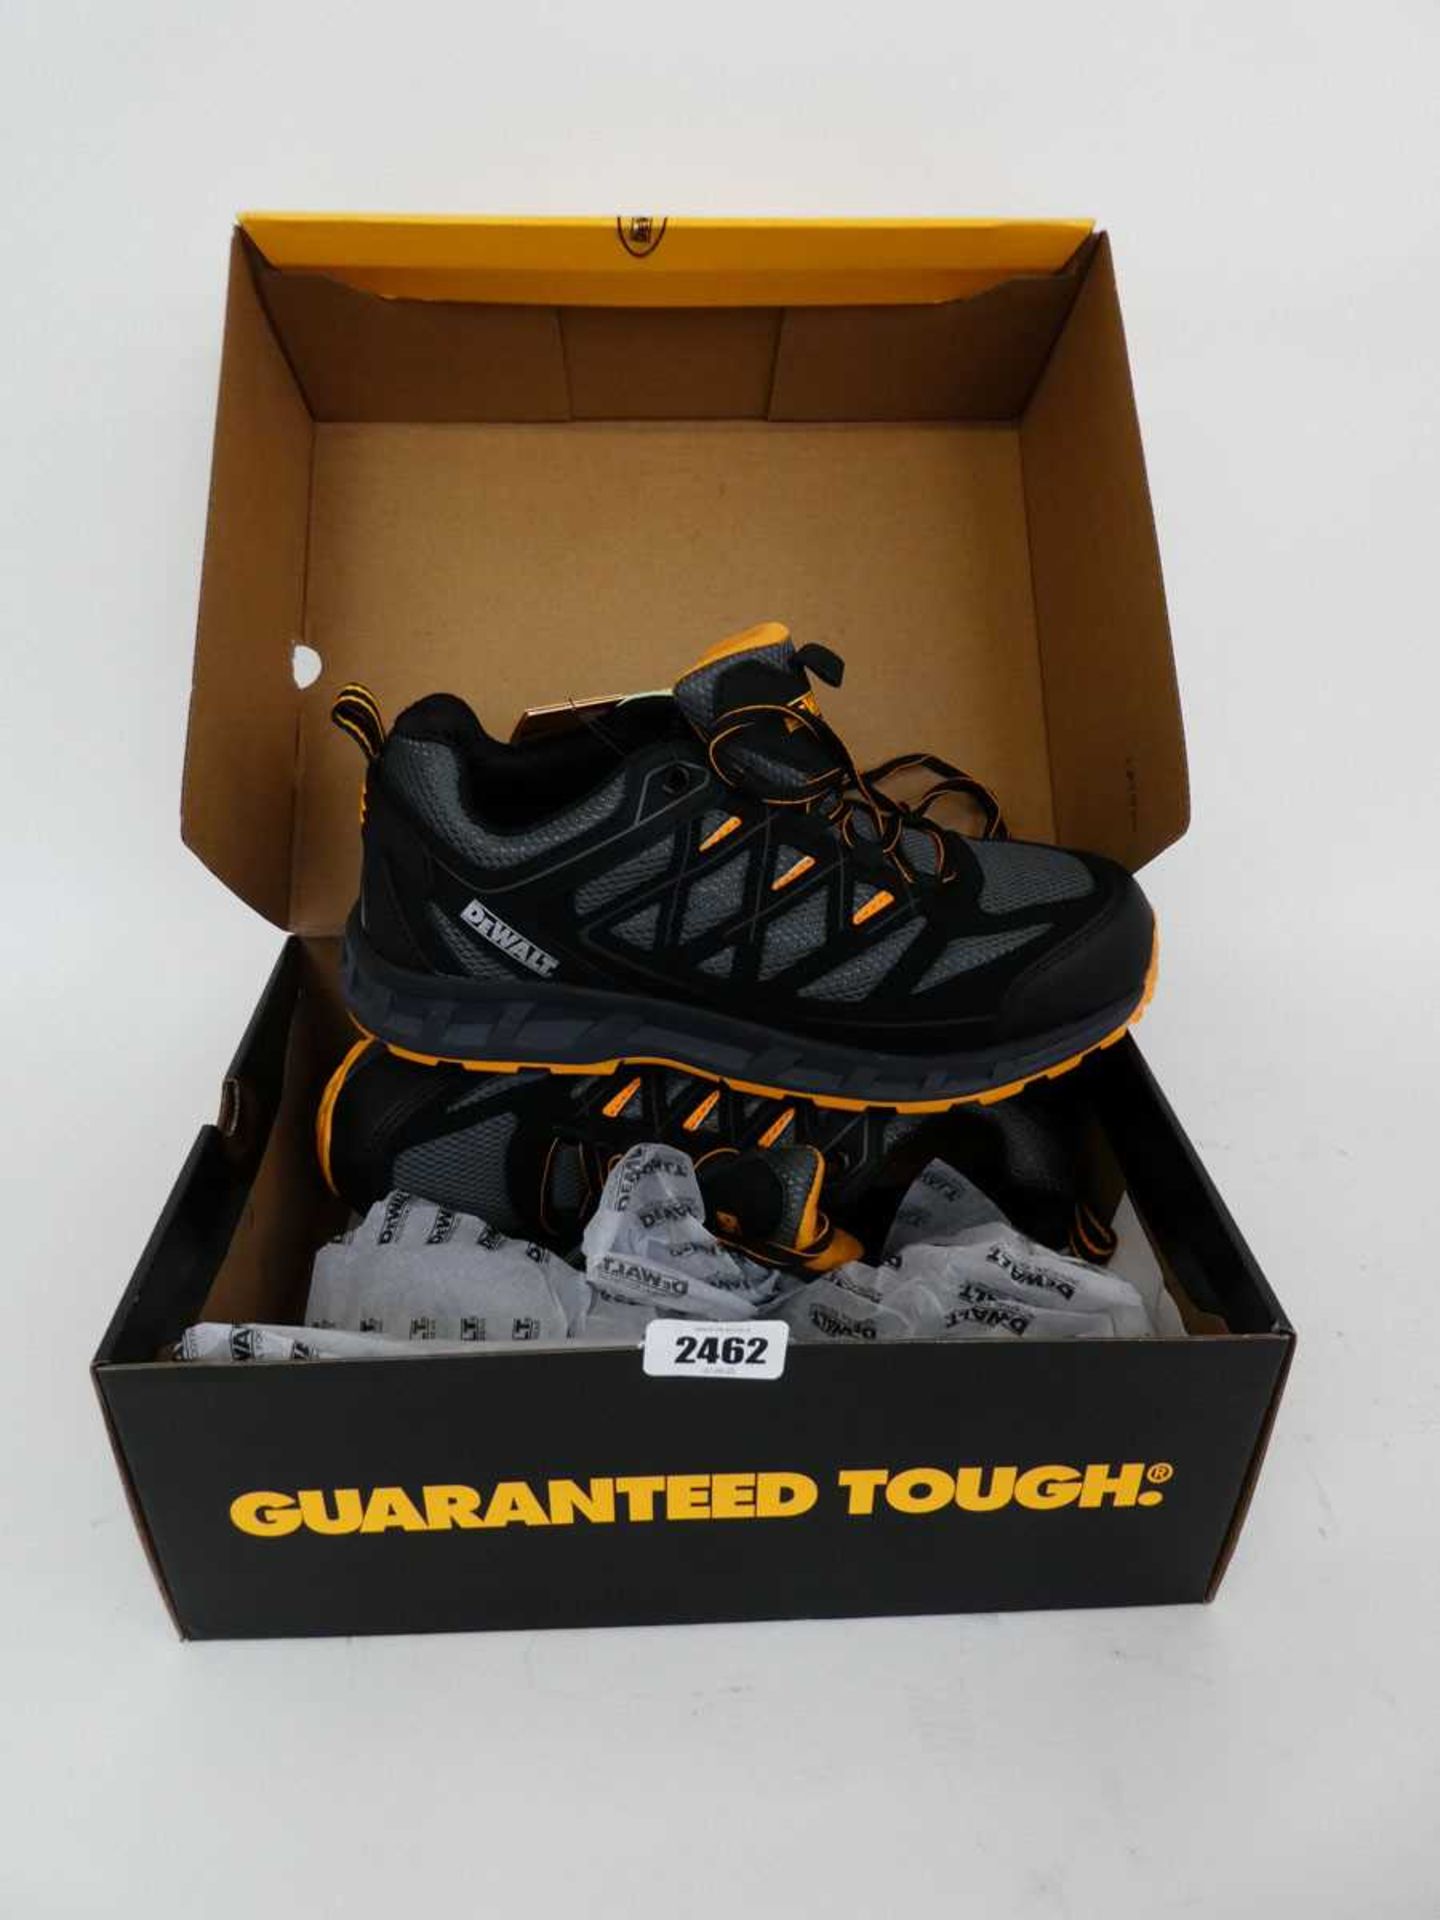 Boxed pair of DeWalt steel toe safety trainers (size 9)